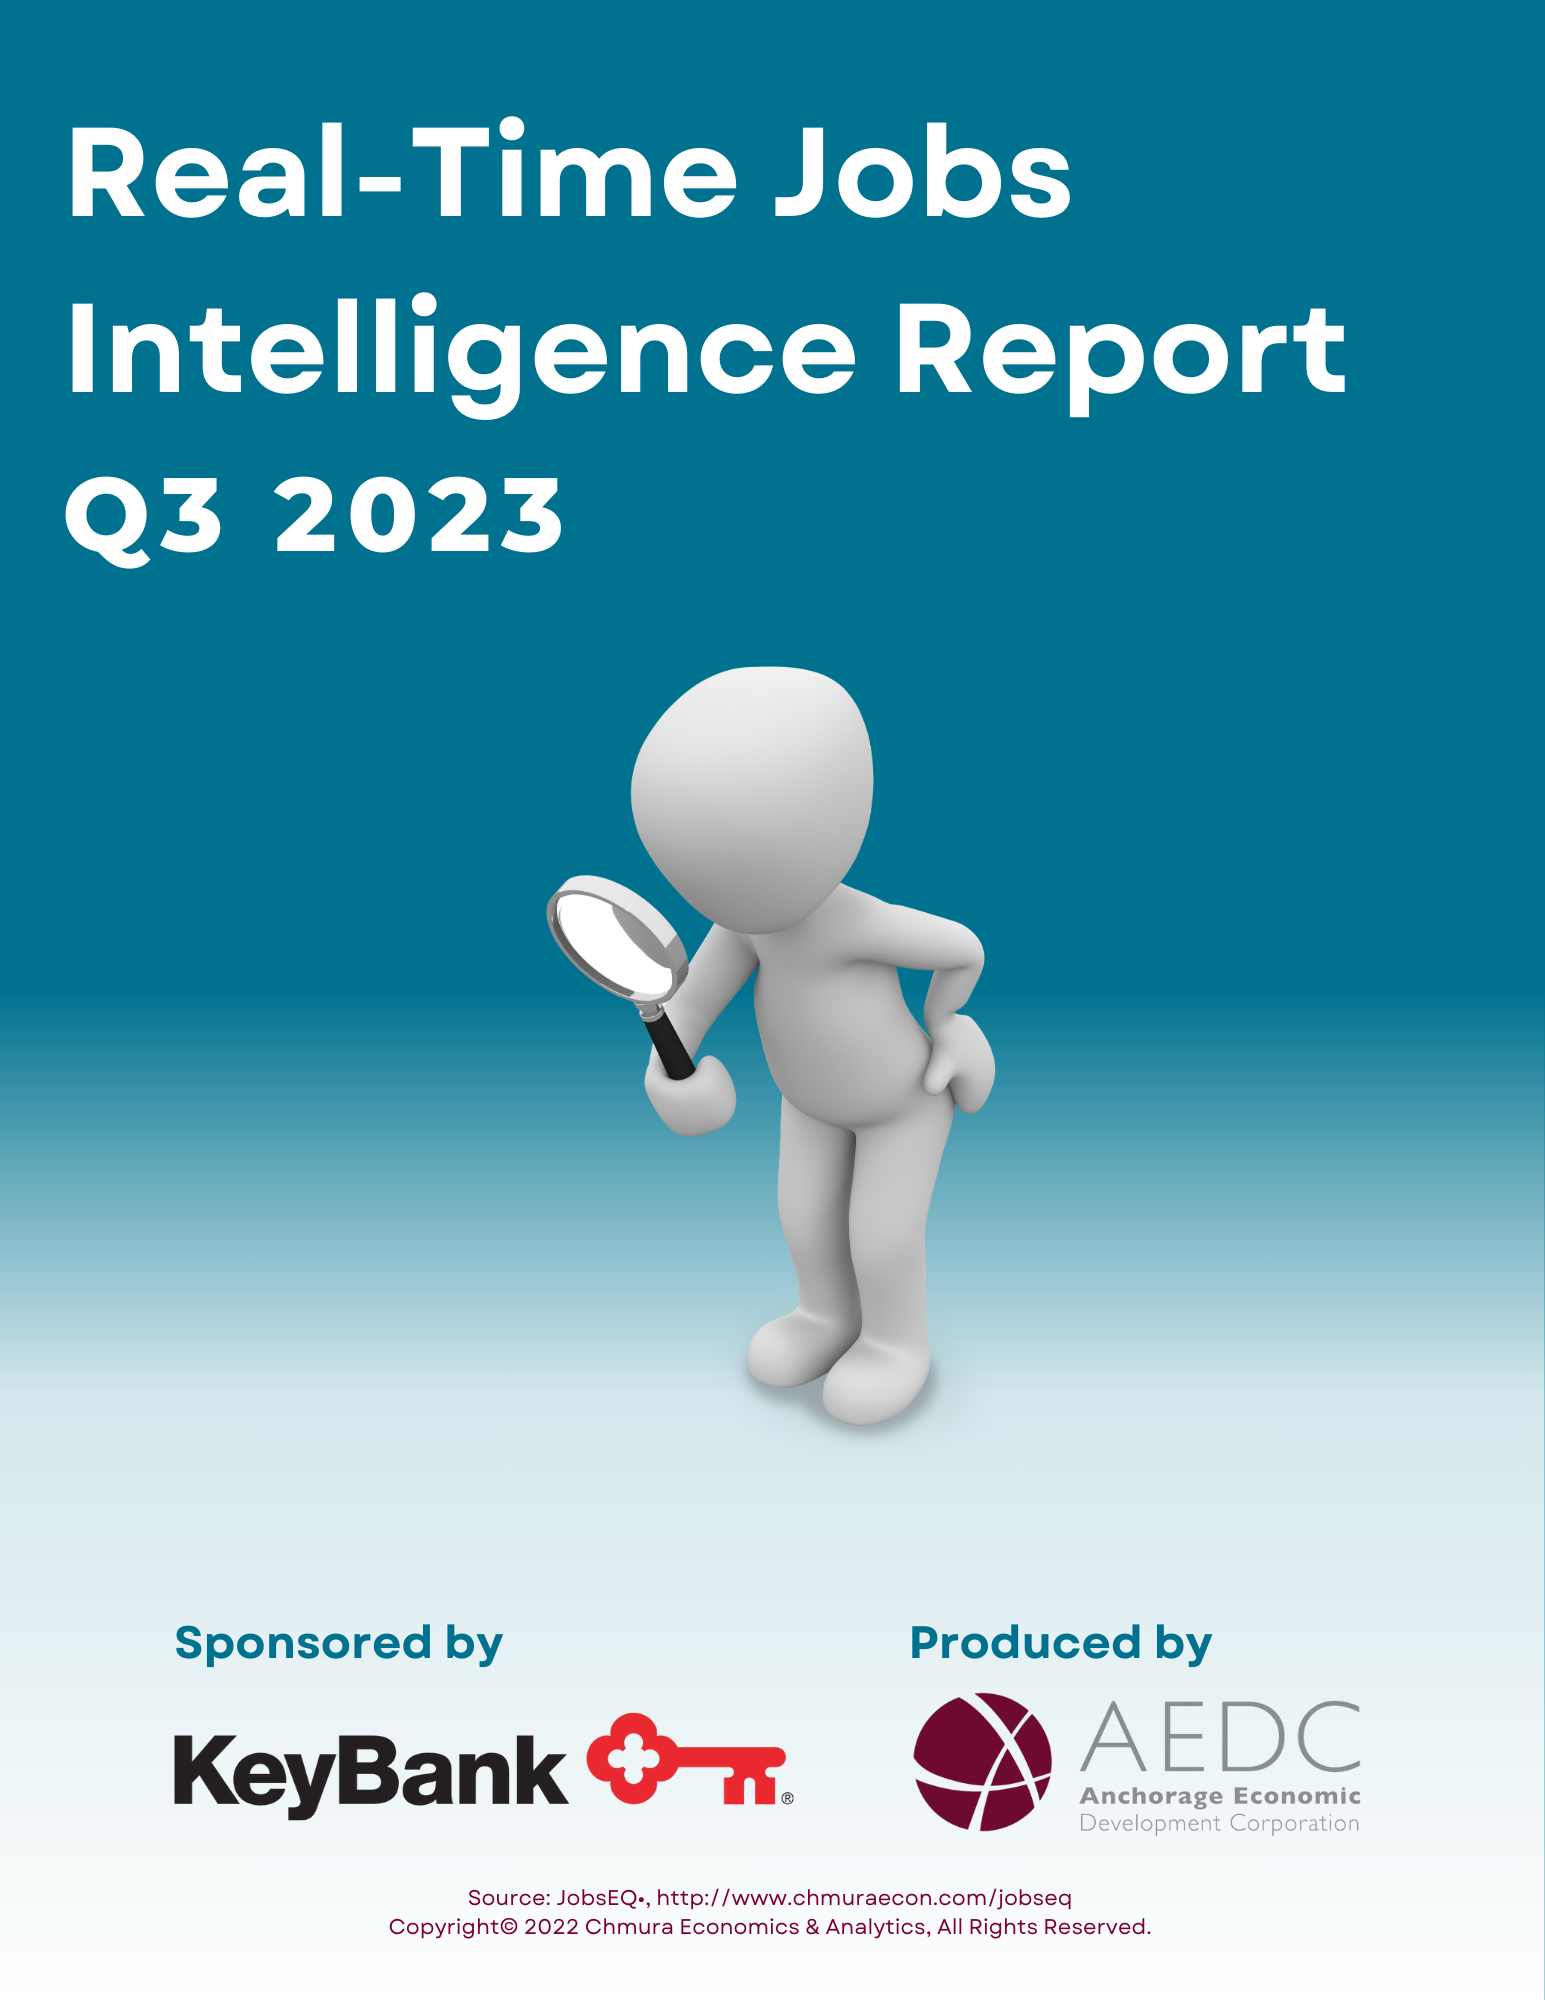 Real-Time Jobs Intelligence Report 2023, Q3